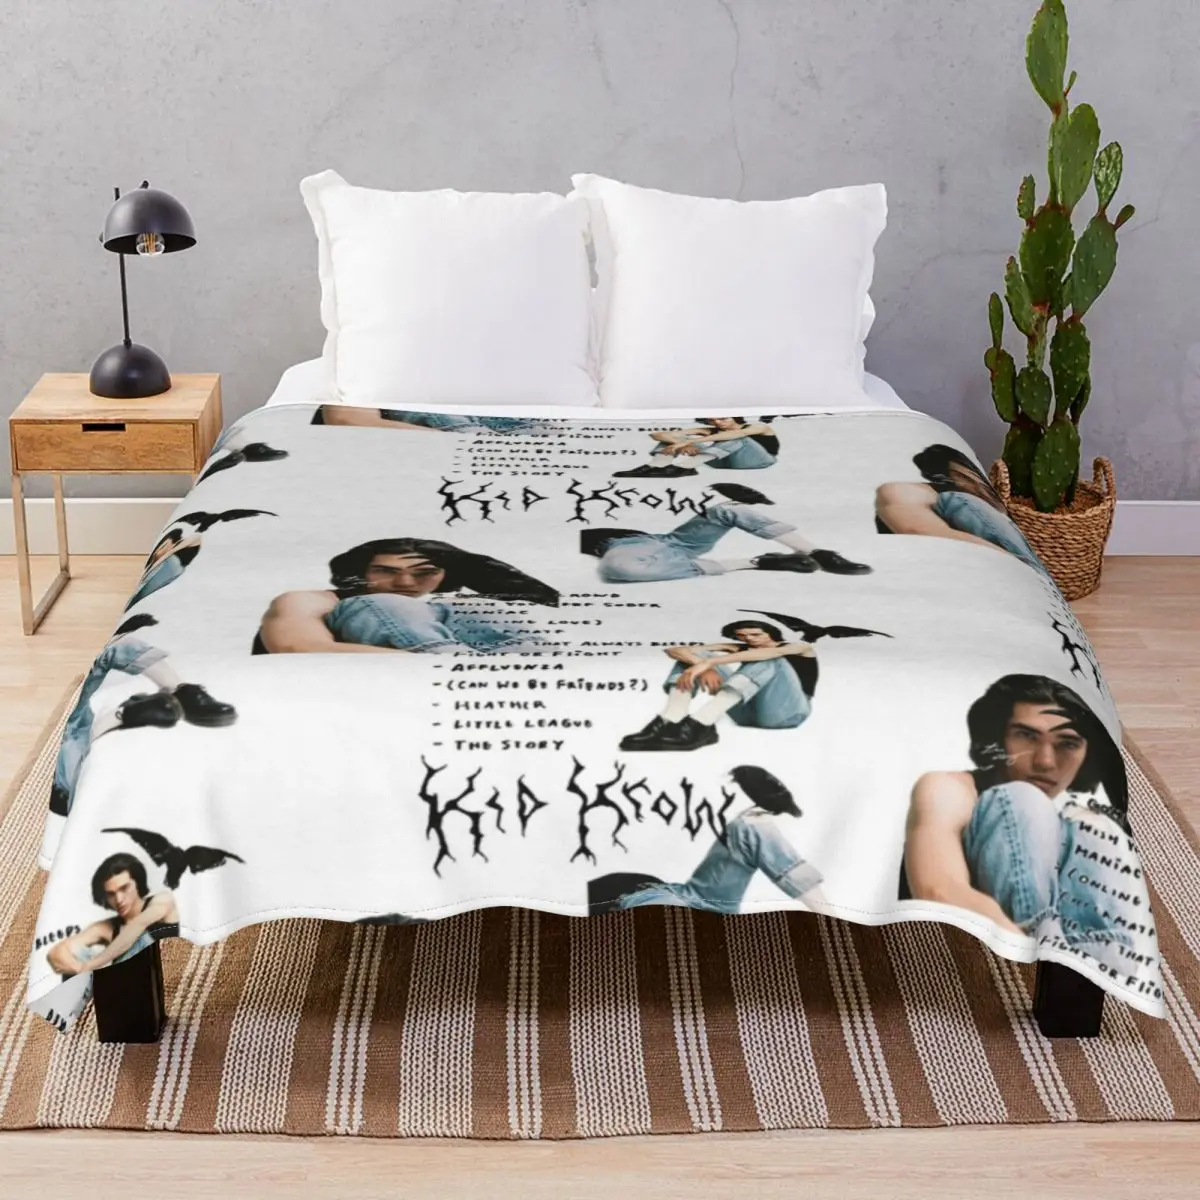 Kid Krow Conan Gray Blankets Flannel Spring/Autumn Super Warm Throw Blanket for Bed Sofa Travel Office